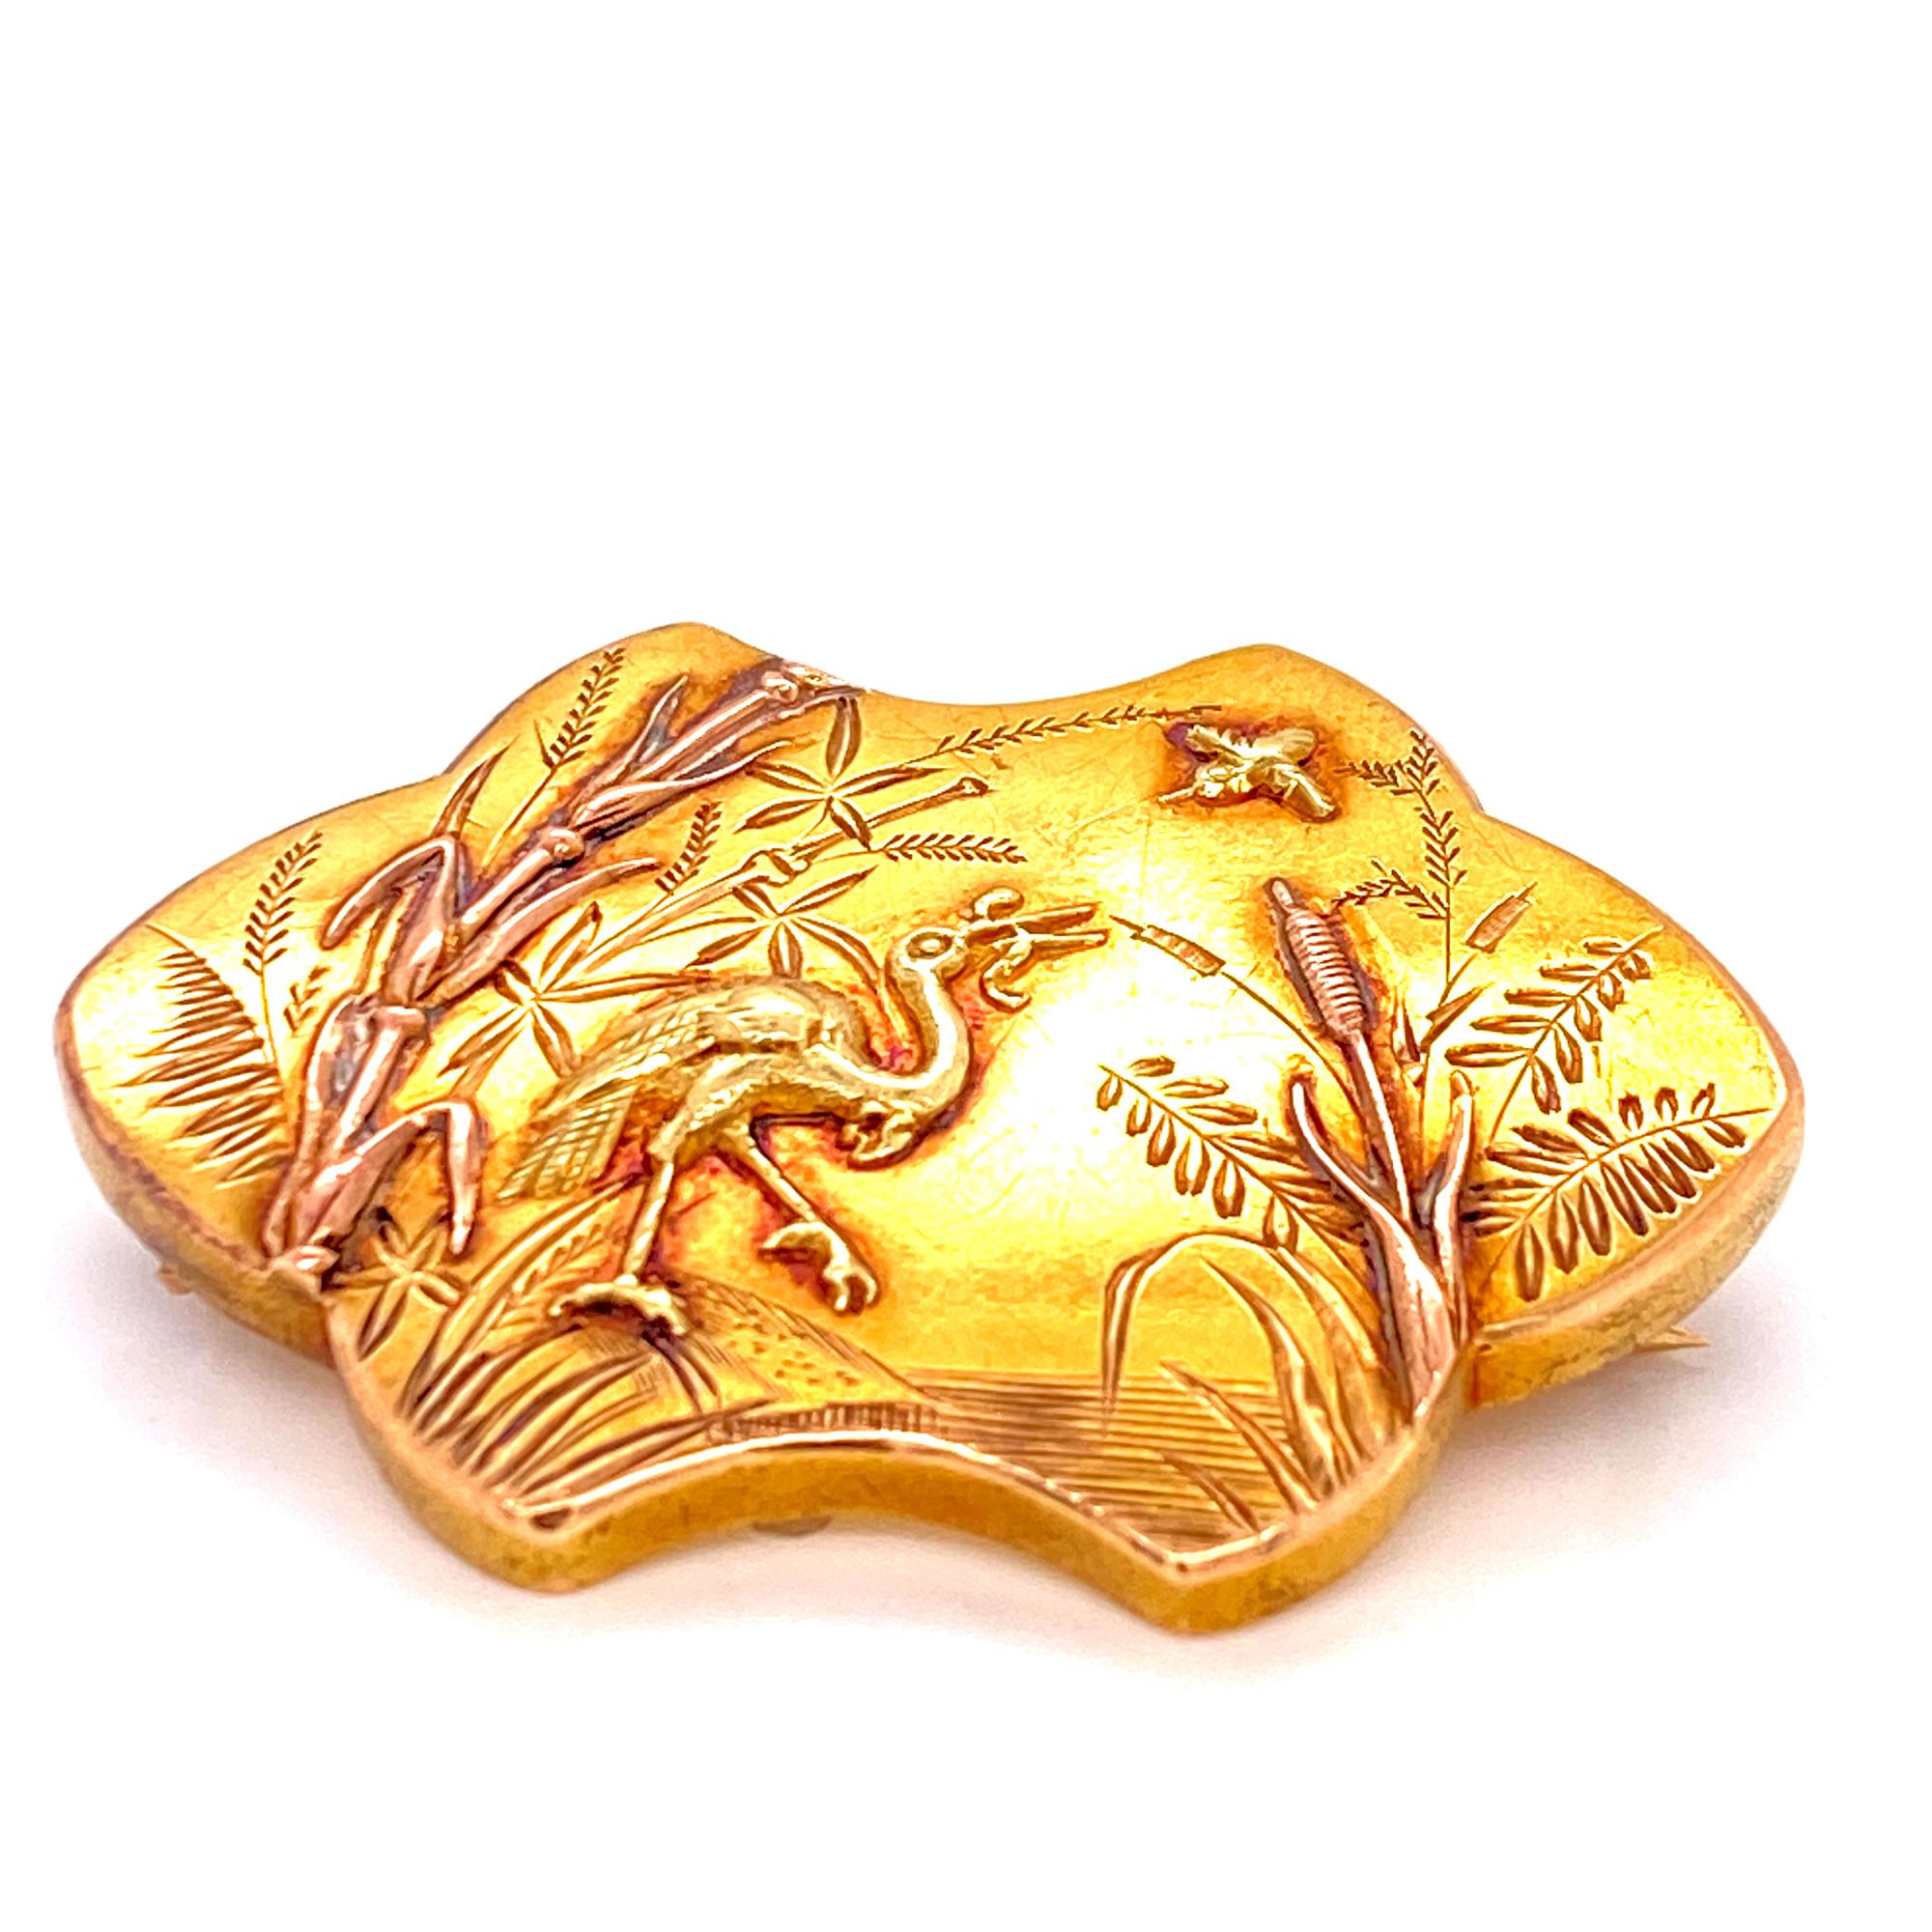 Original Art Nouveau 18 karat yellow gold beautifully handcrafted brooch featuring a nature scene.  The piece is circa late 1800's-early 1900's, and  measures 1.0 x 1.5 inches and weighs 7.2 grams. Good condition.